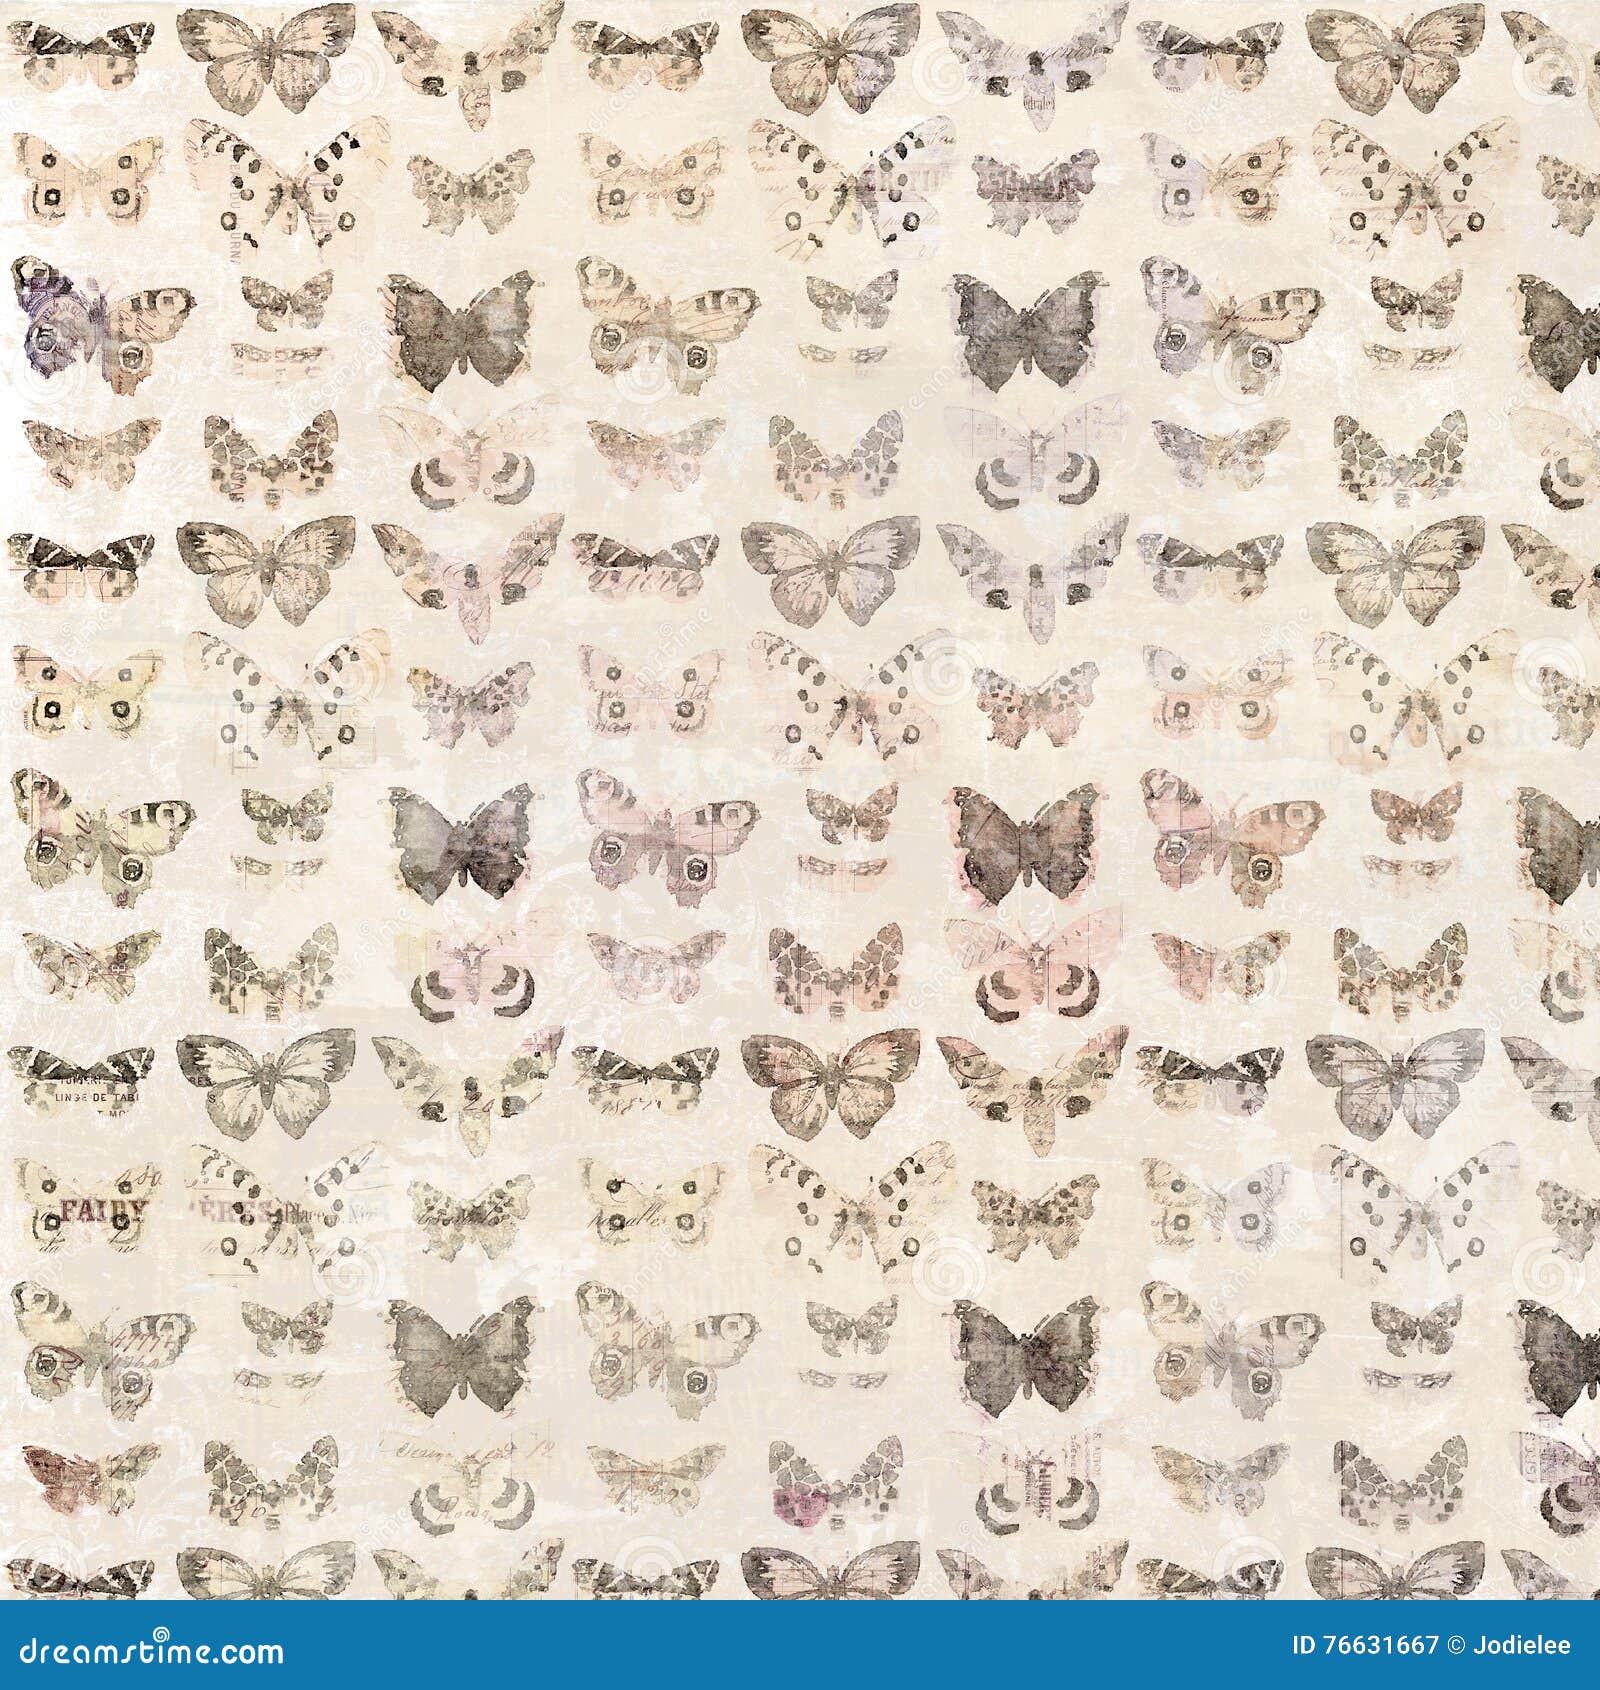 antique watercolor butterflies illustrated patterned background